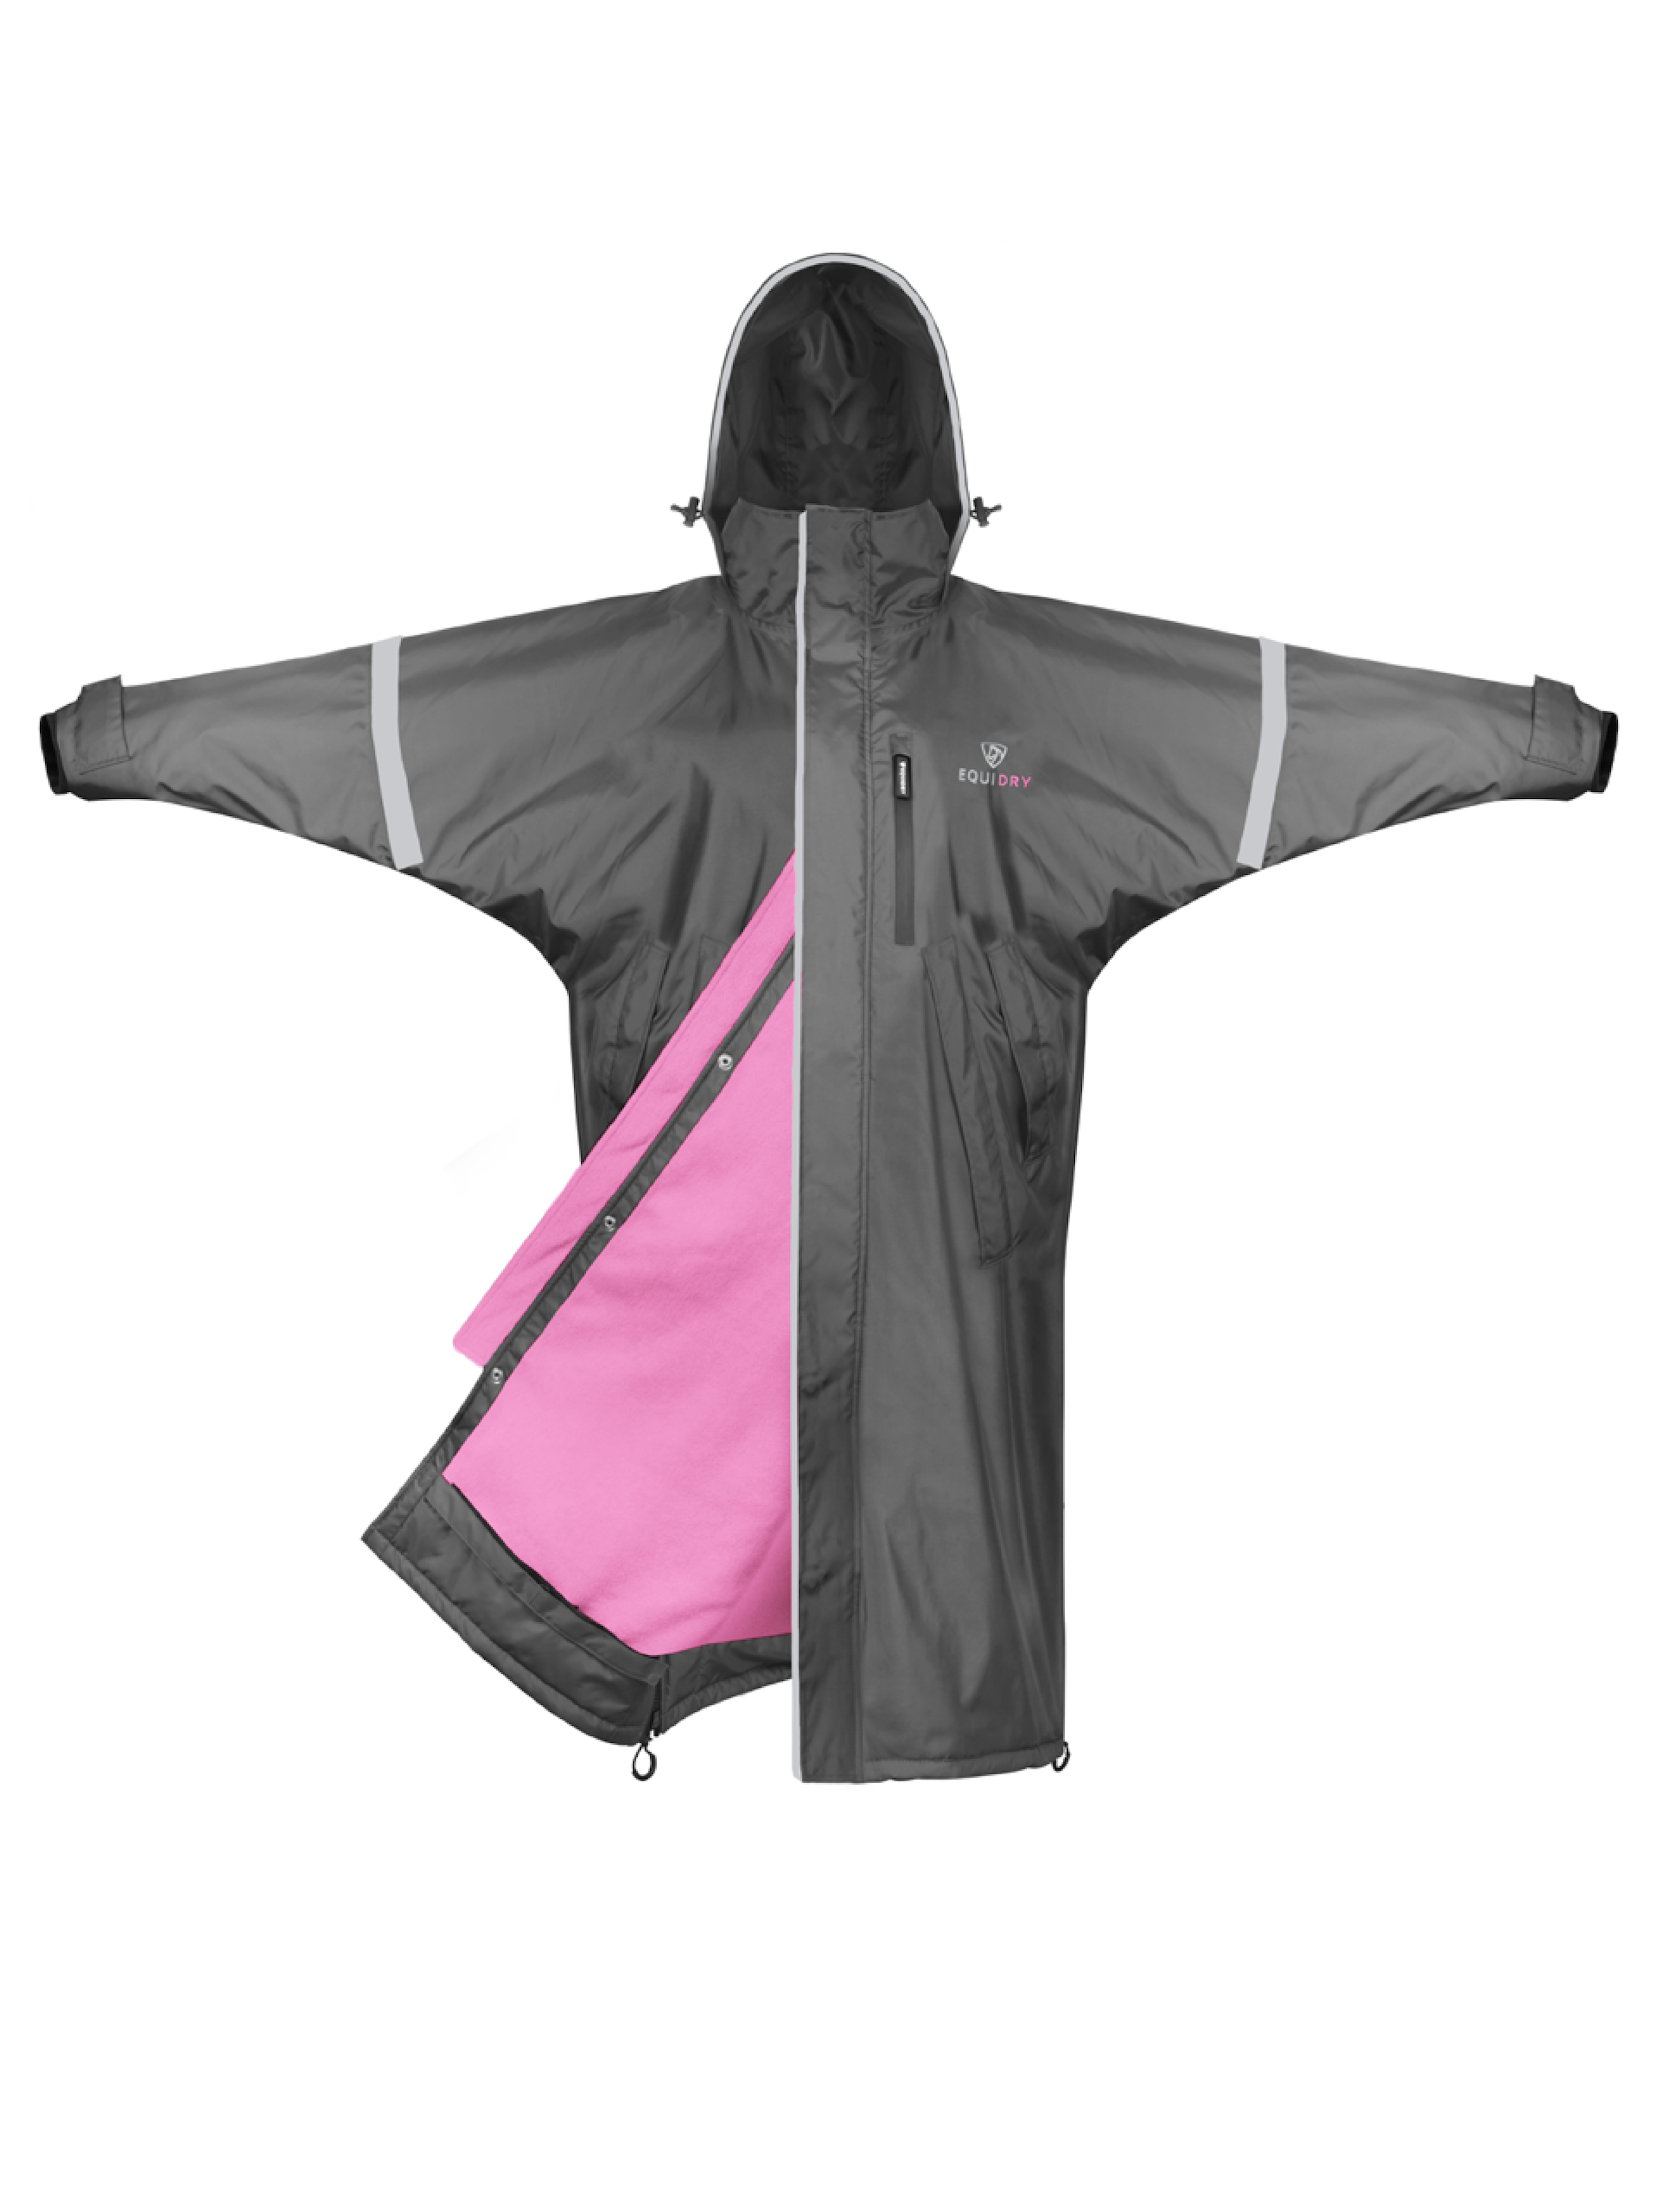 reflective_proride_evo_lite_front_charcoal_36fe5702-5180-46cd-be94-bcf5605d87b1.png